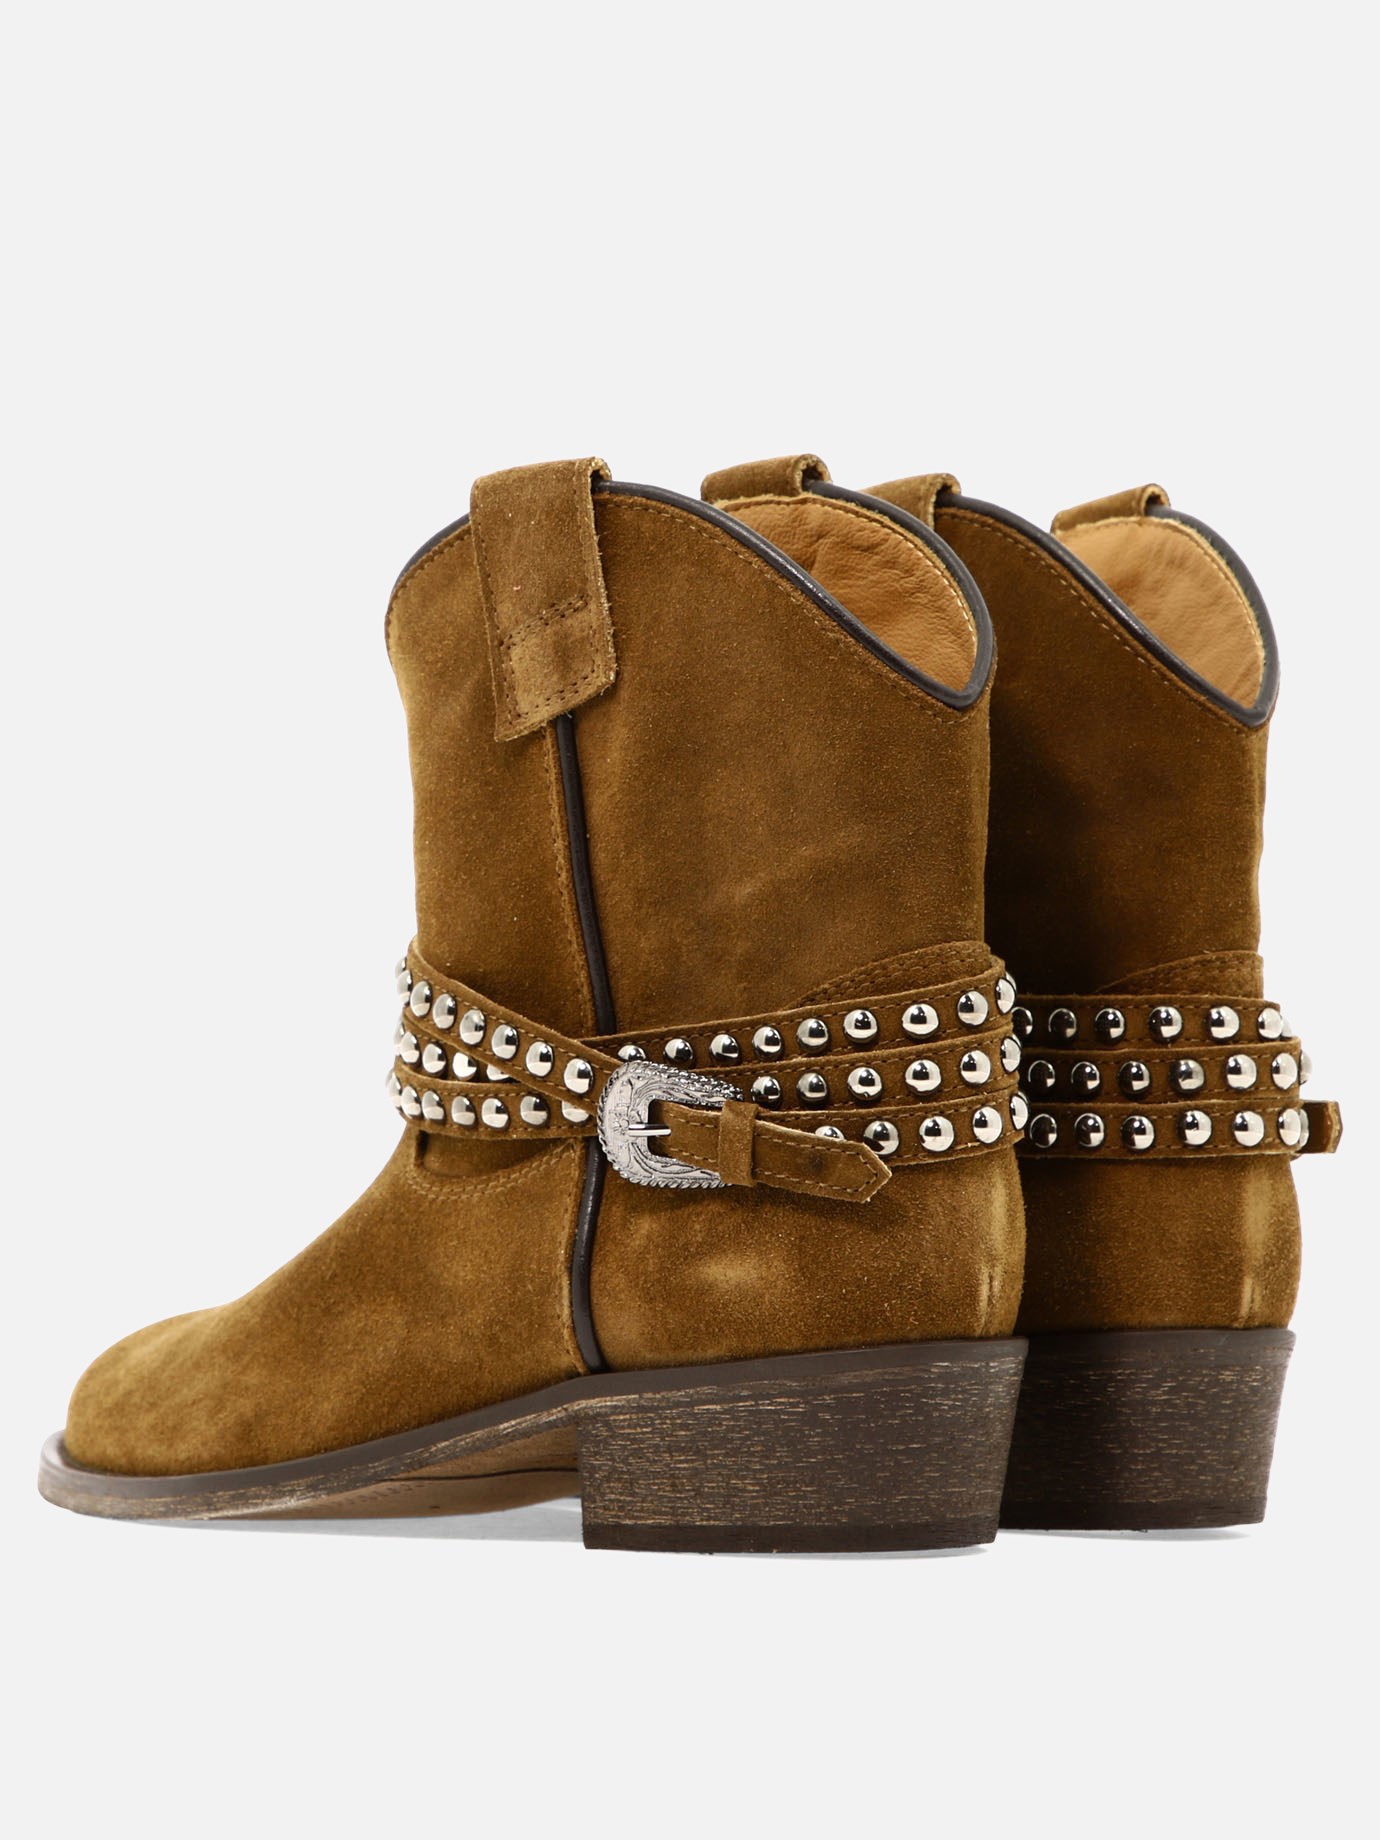 Studded boots by Via Roma 15